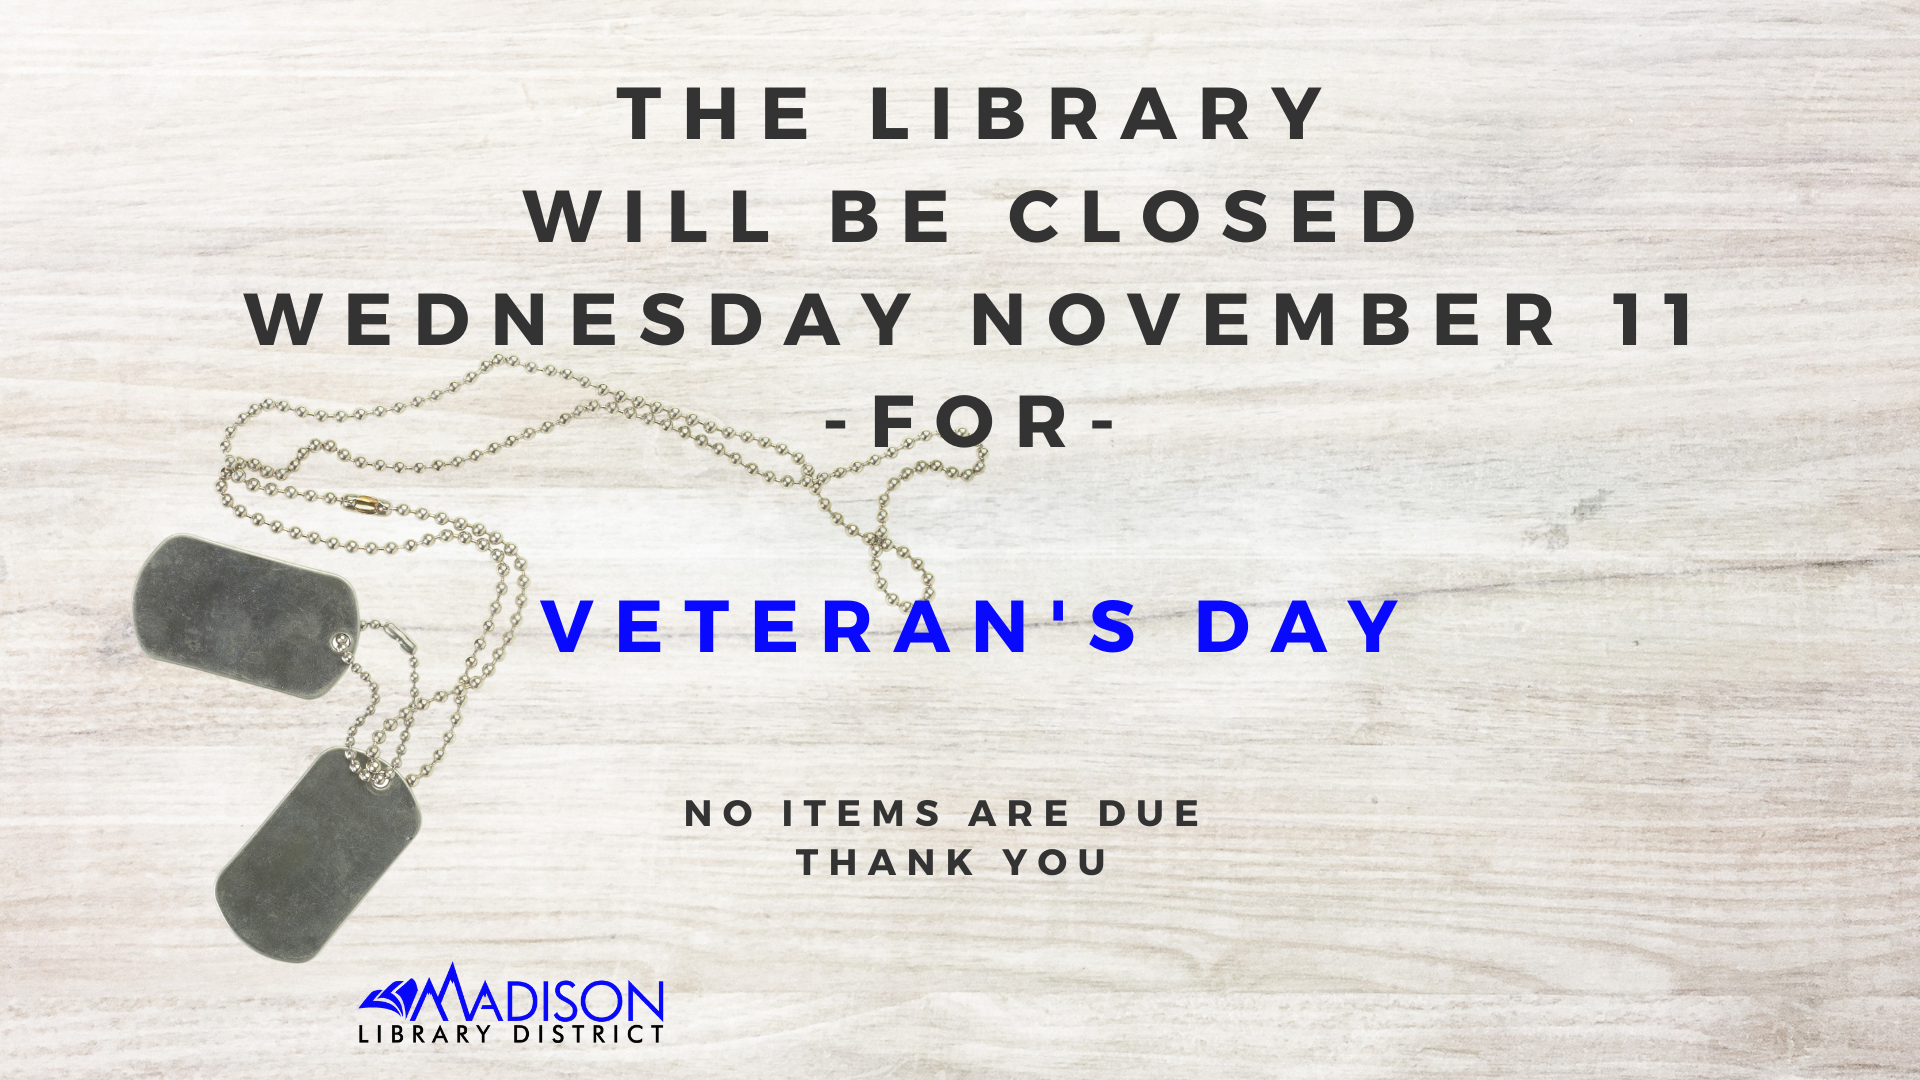 The library will be closed on Wednesday, November 11 for Veteran's Day. No items are due. Thank you.